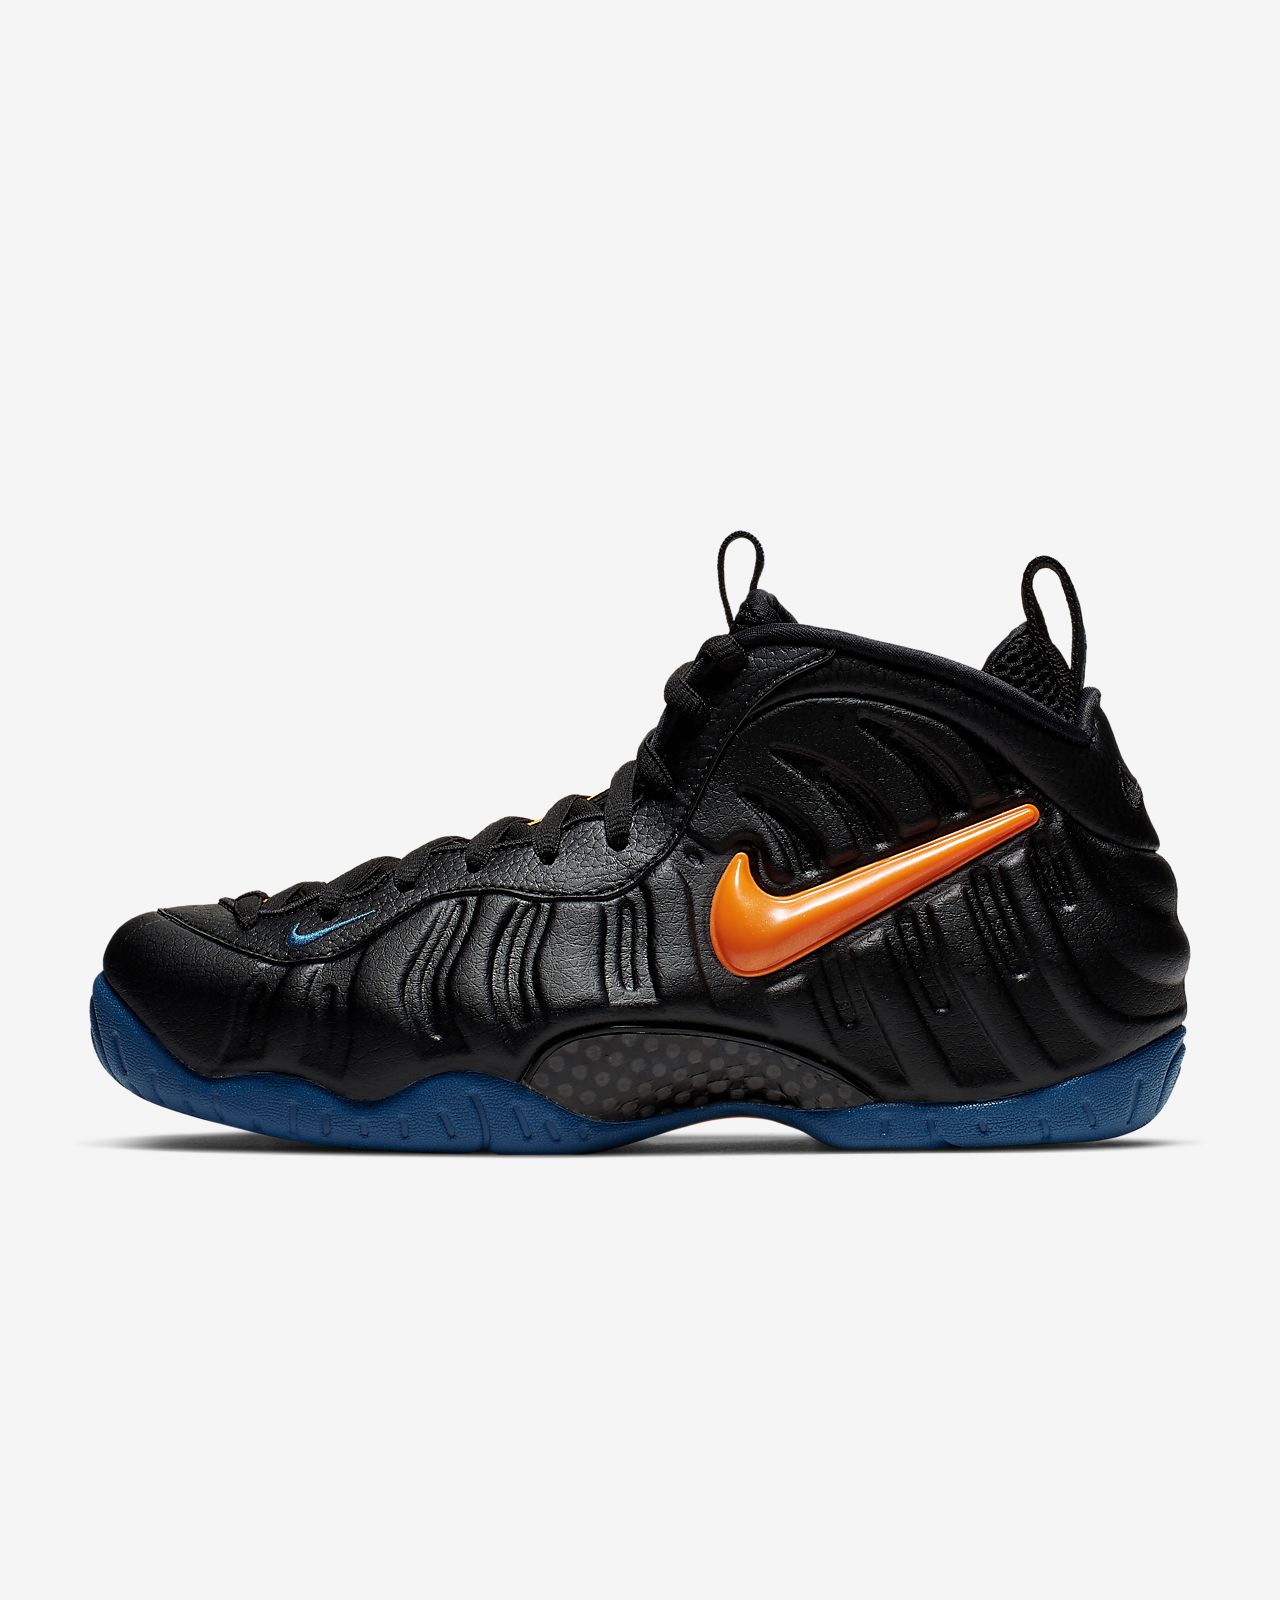 Foamposites Kijiji in Ontario. Buy, Sell & Save with